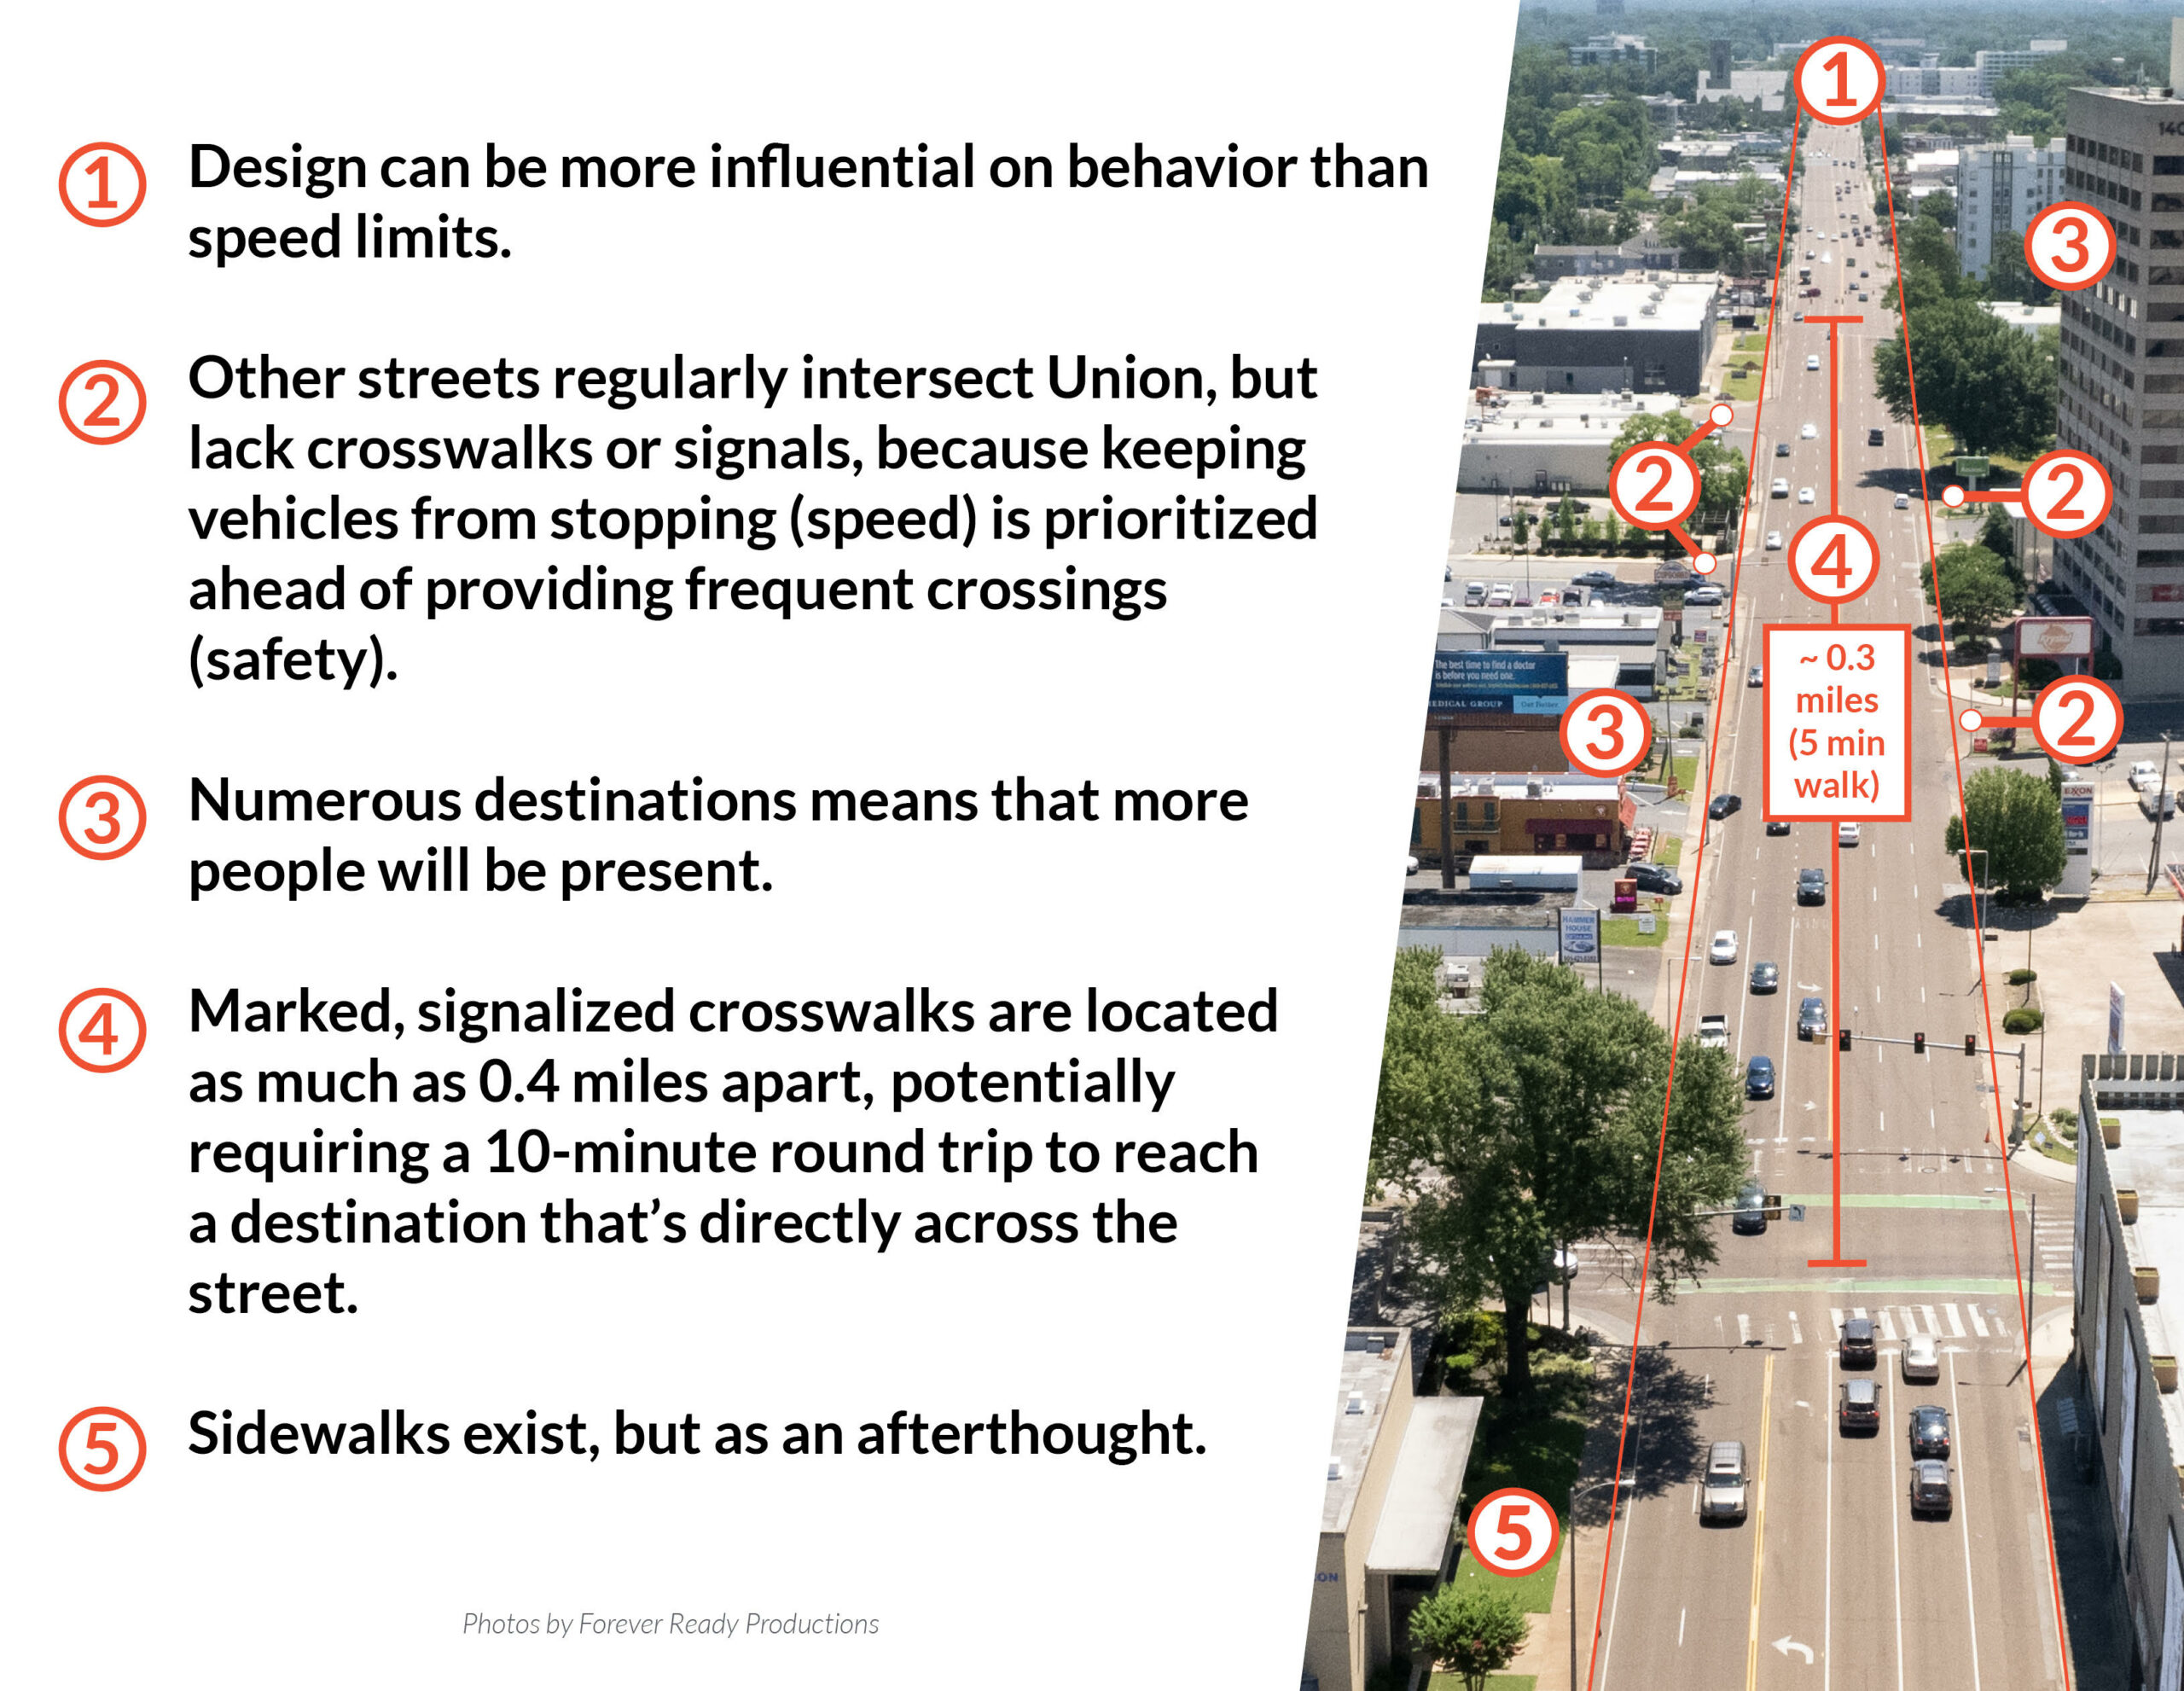 graphic illustrating the design features of union avenue in memphis that make it unsafe and prioritize speed